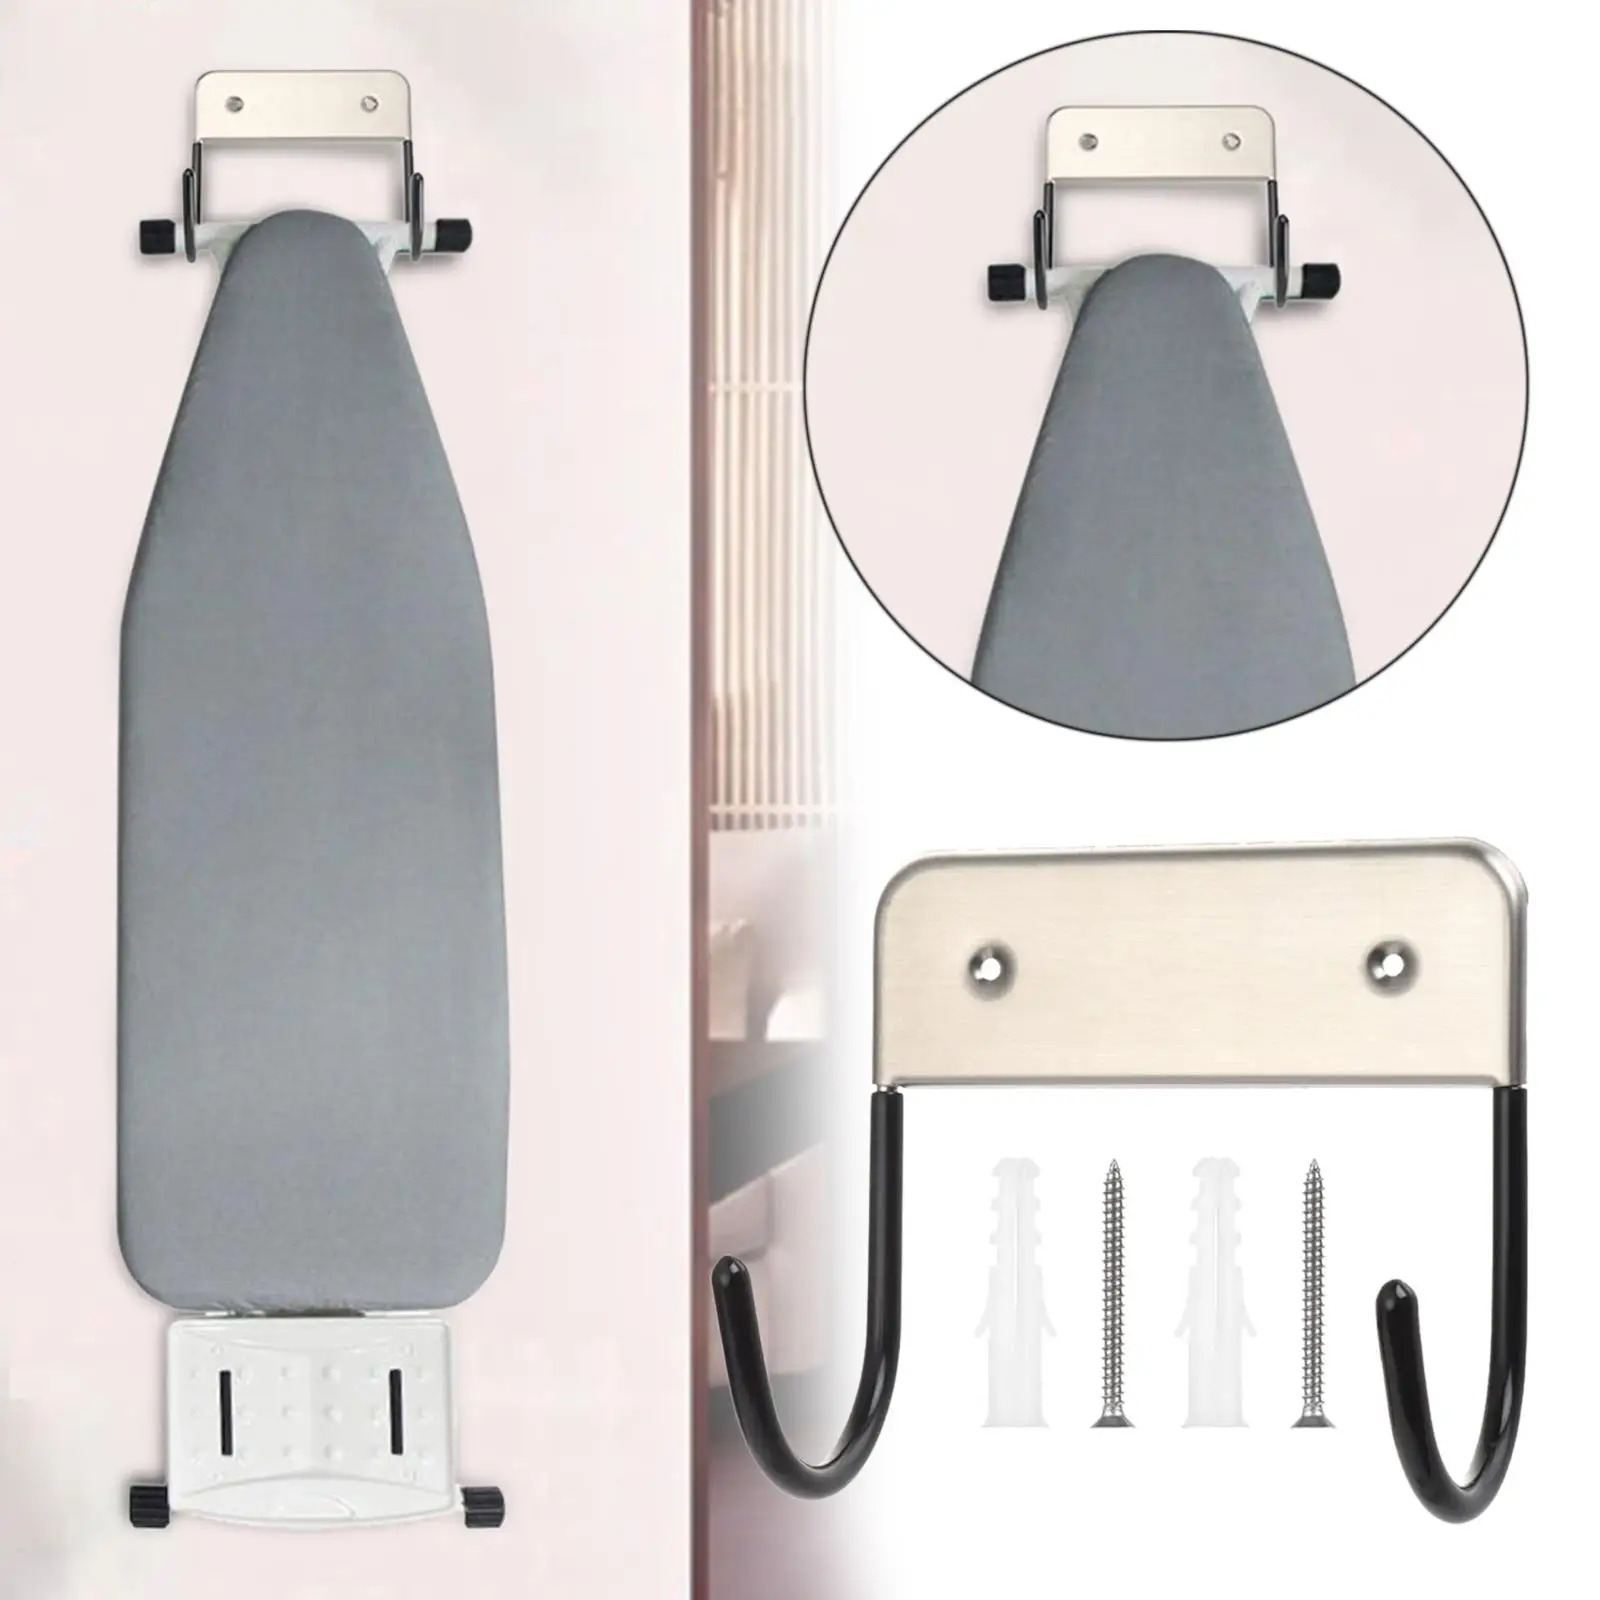 Ironing Board Holder Wall Hanging Stainless Steel Ironing Hook Wall Mounted for Room Wall